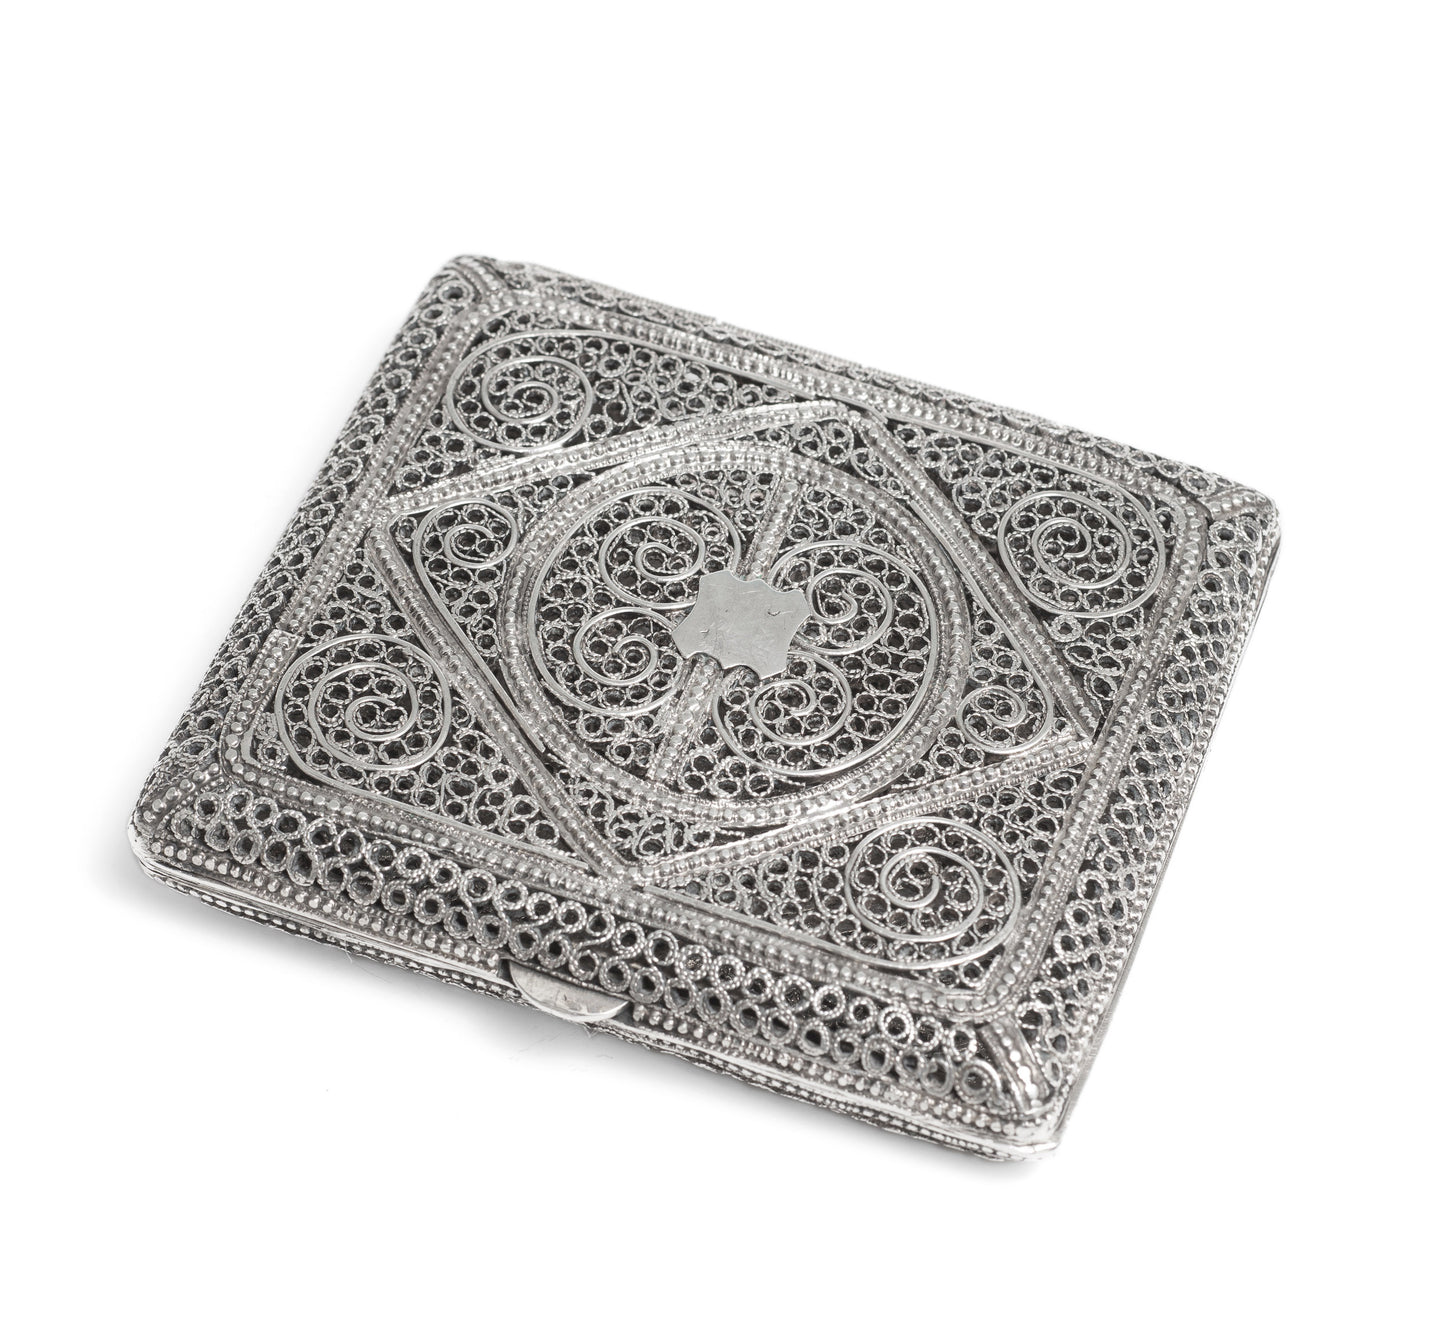 Antique Middle Eastern Hand Made Silver Filigree Wire Cigarette Case c1890 (Code 2221)